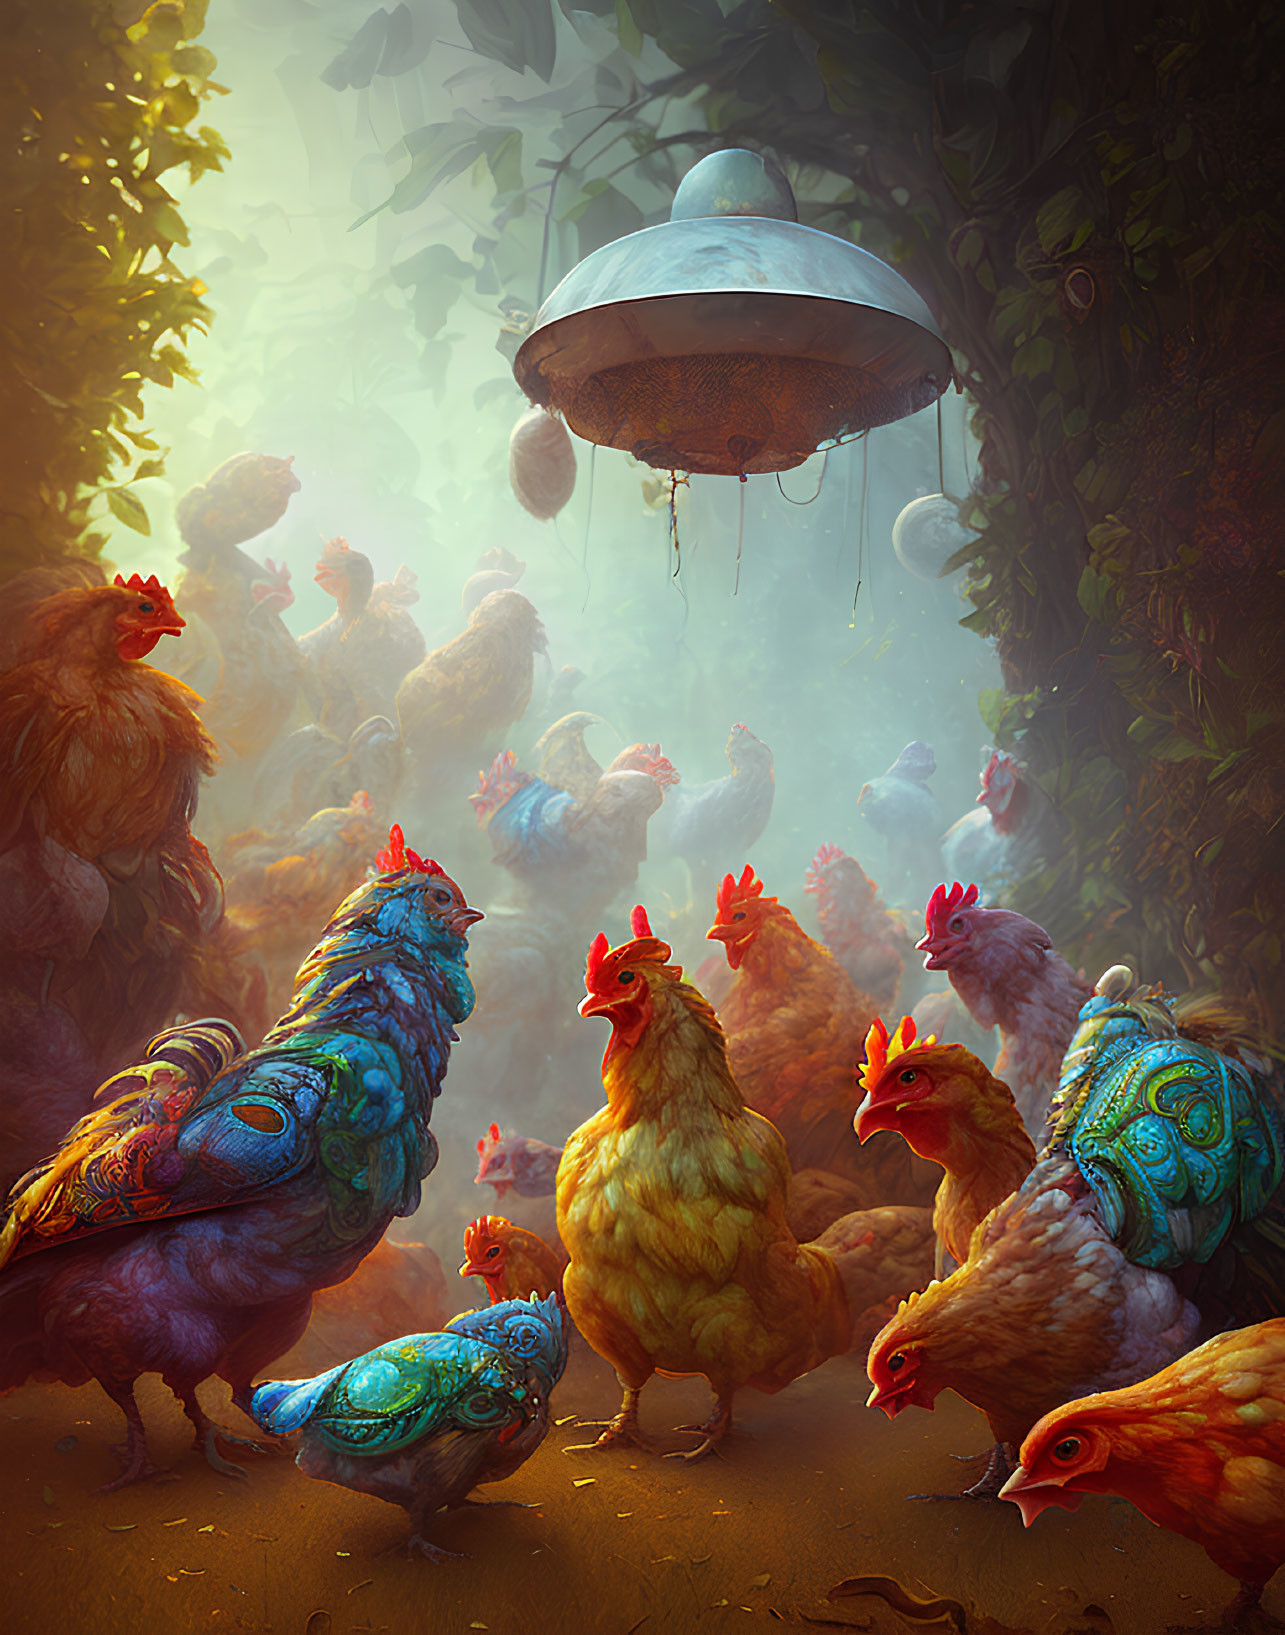 Vibrant chickens observe UFO in forest fog under warm sunlight